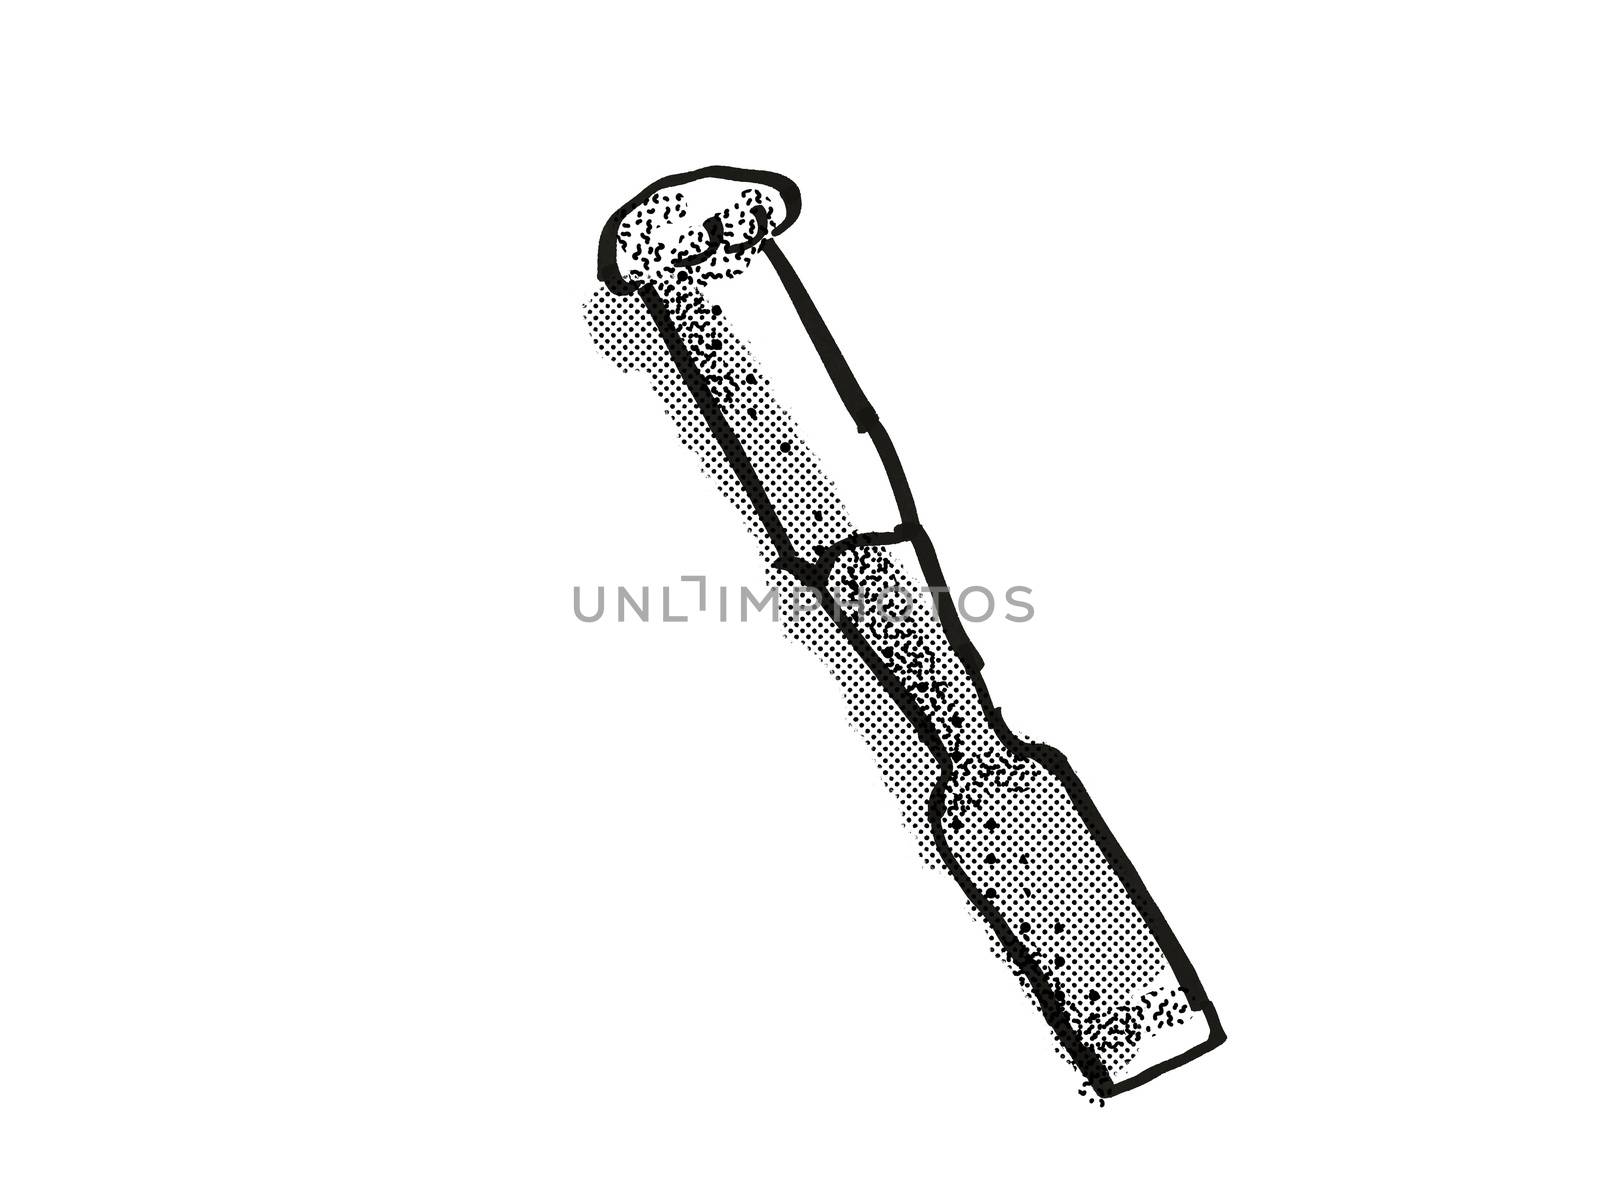 Retro cartoon style drawing of a chisel, a woodworking hand tool  on isolated white background done in black and white